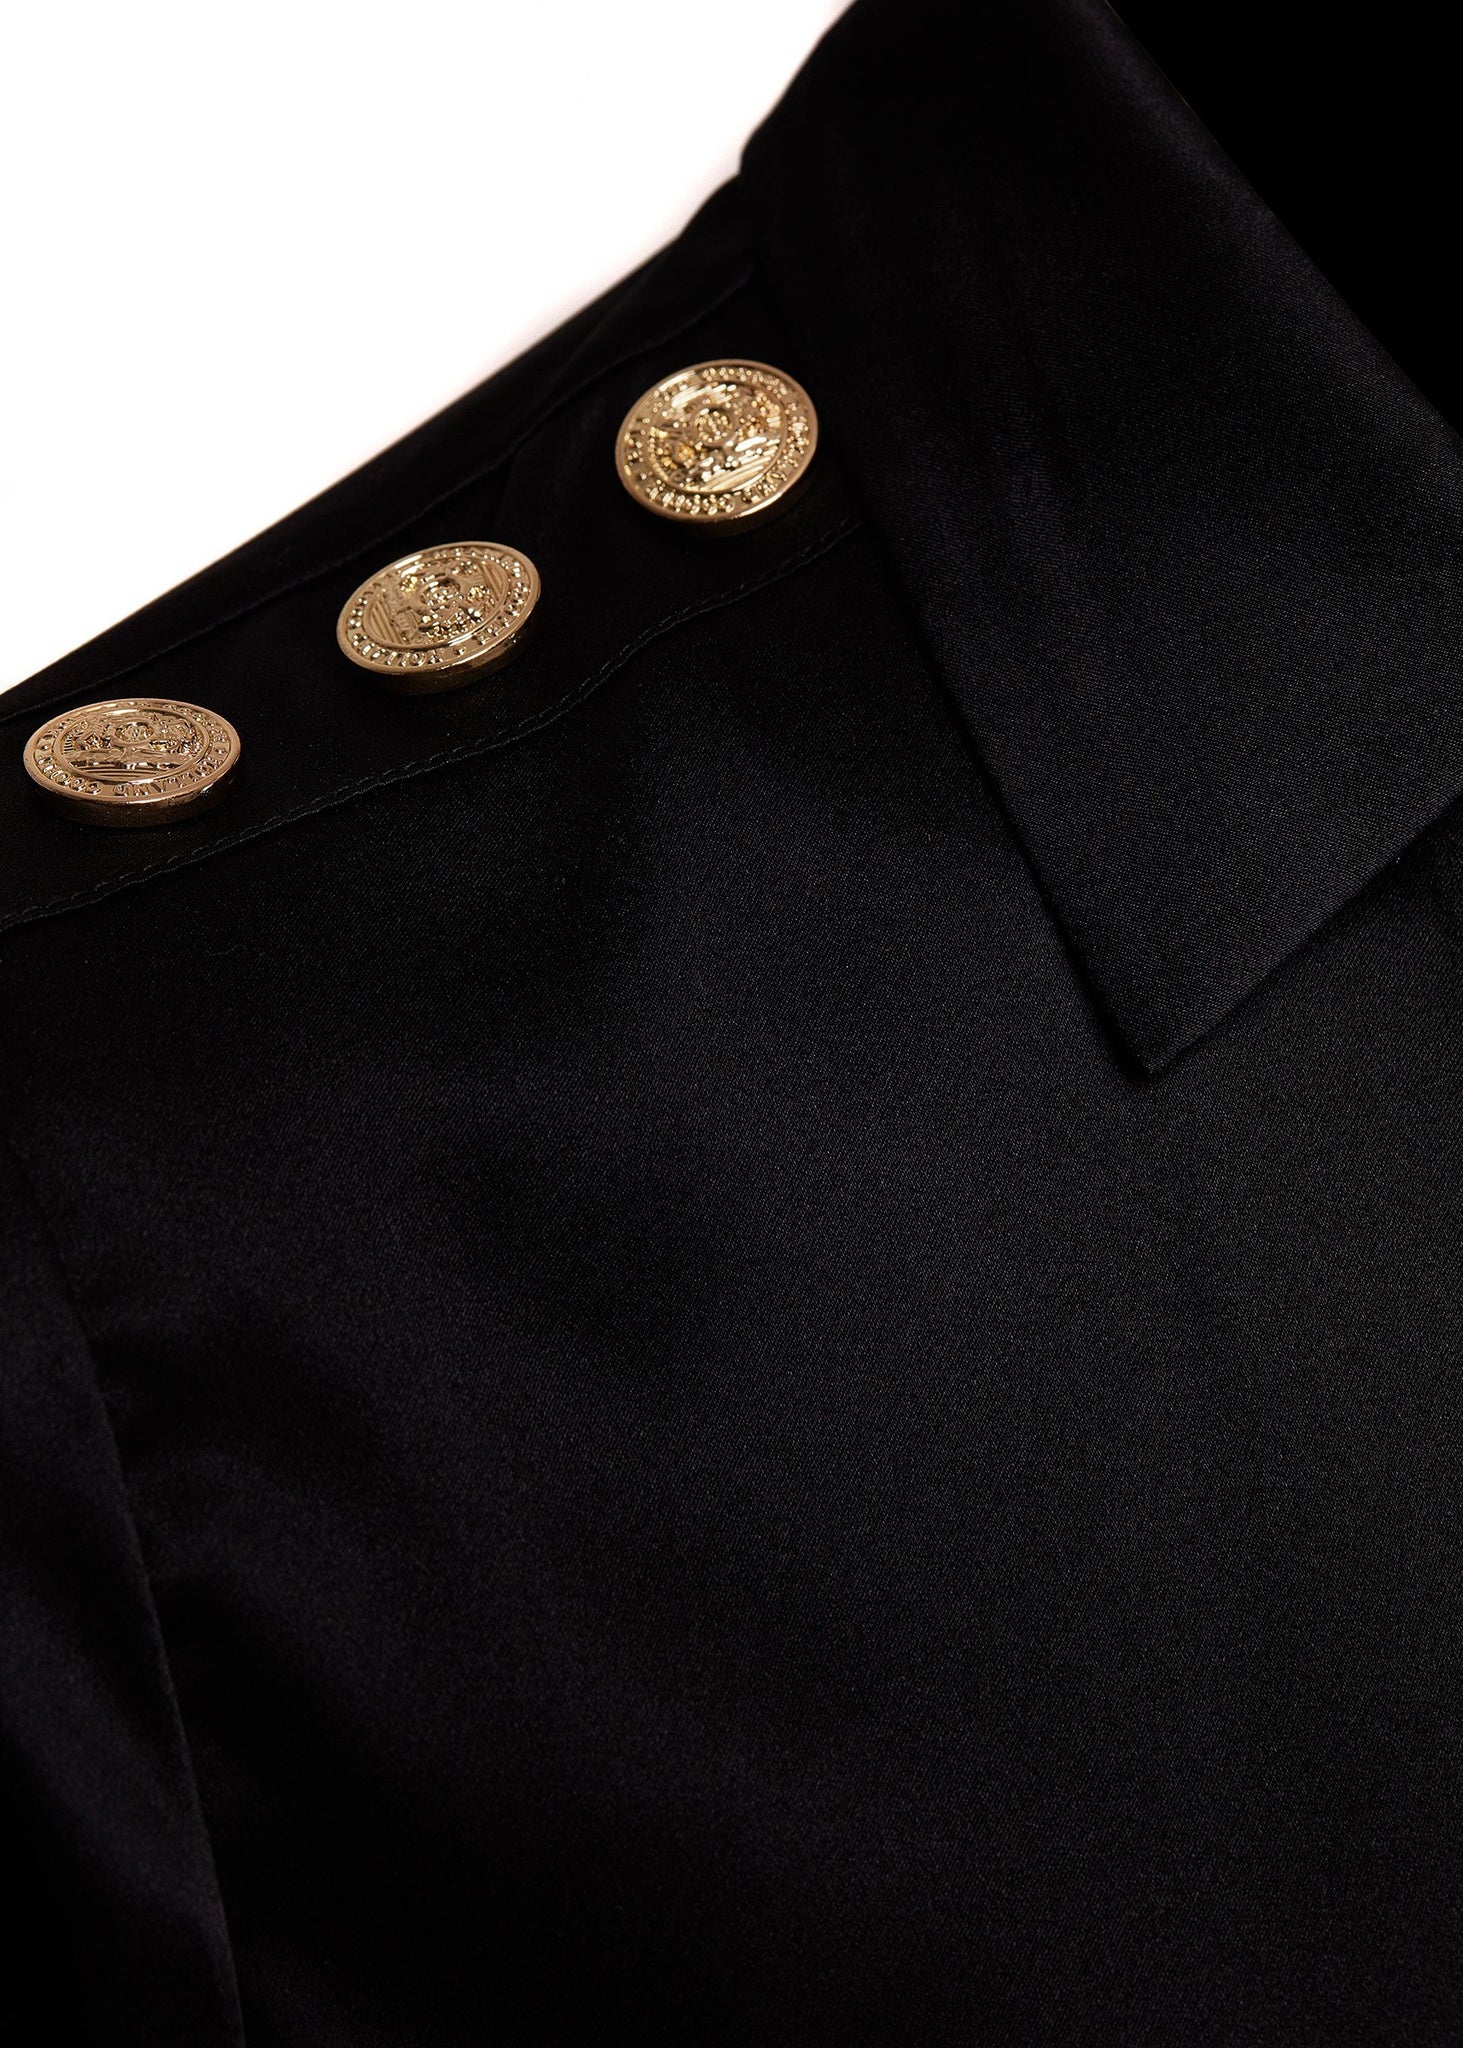 gold button shoulder detail of womens long sleeve black silk v neck blouse with gold buttons